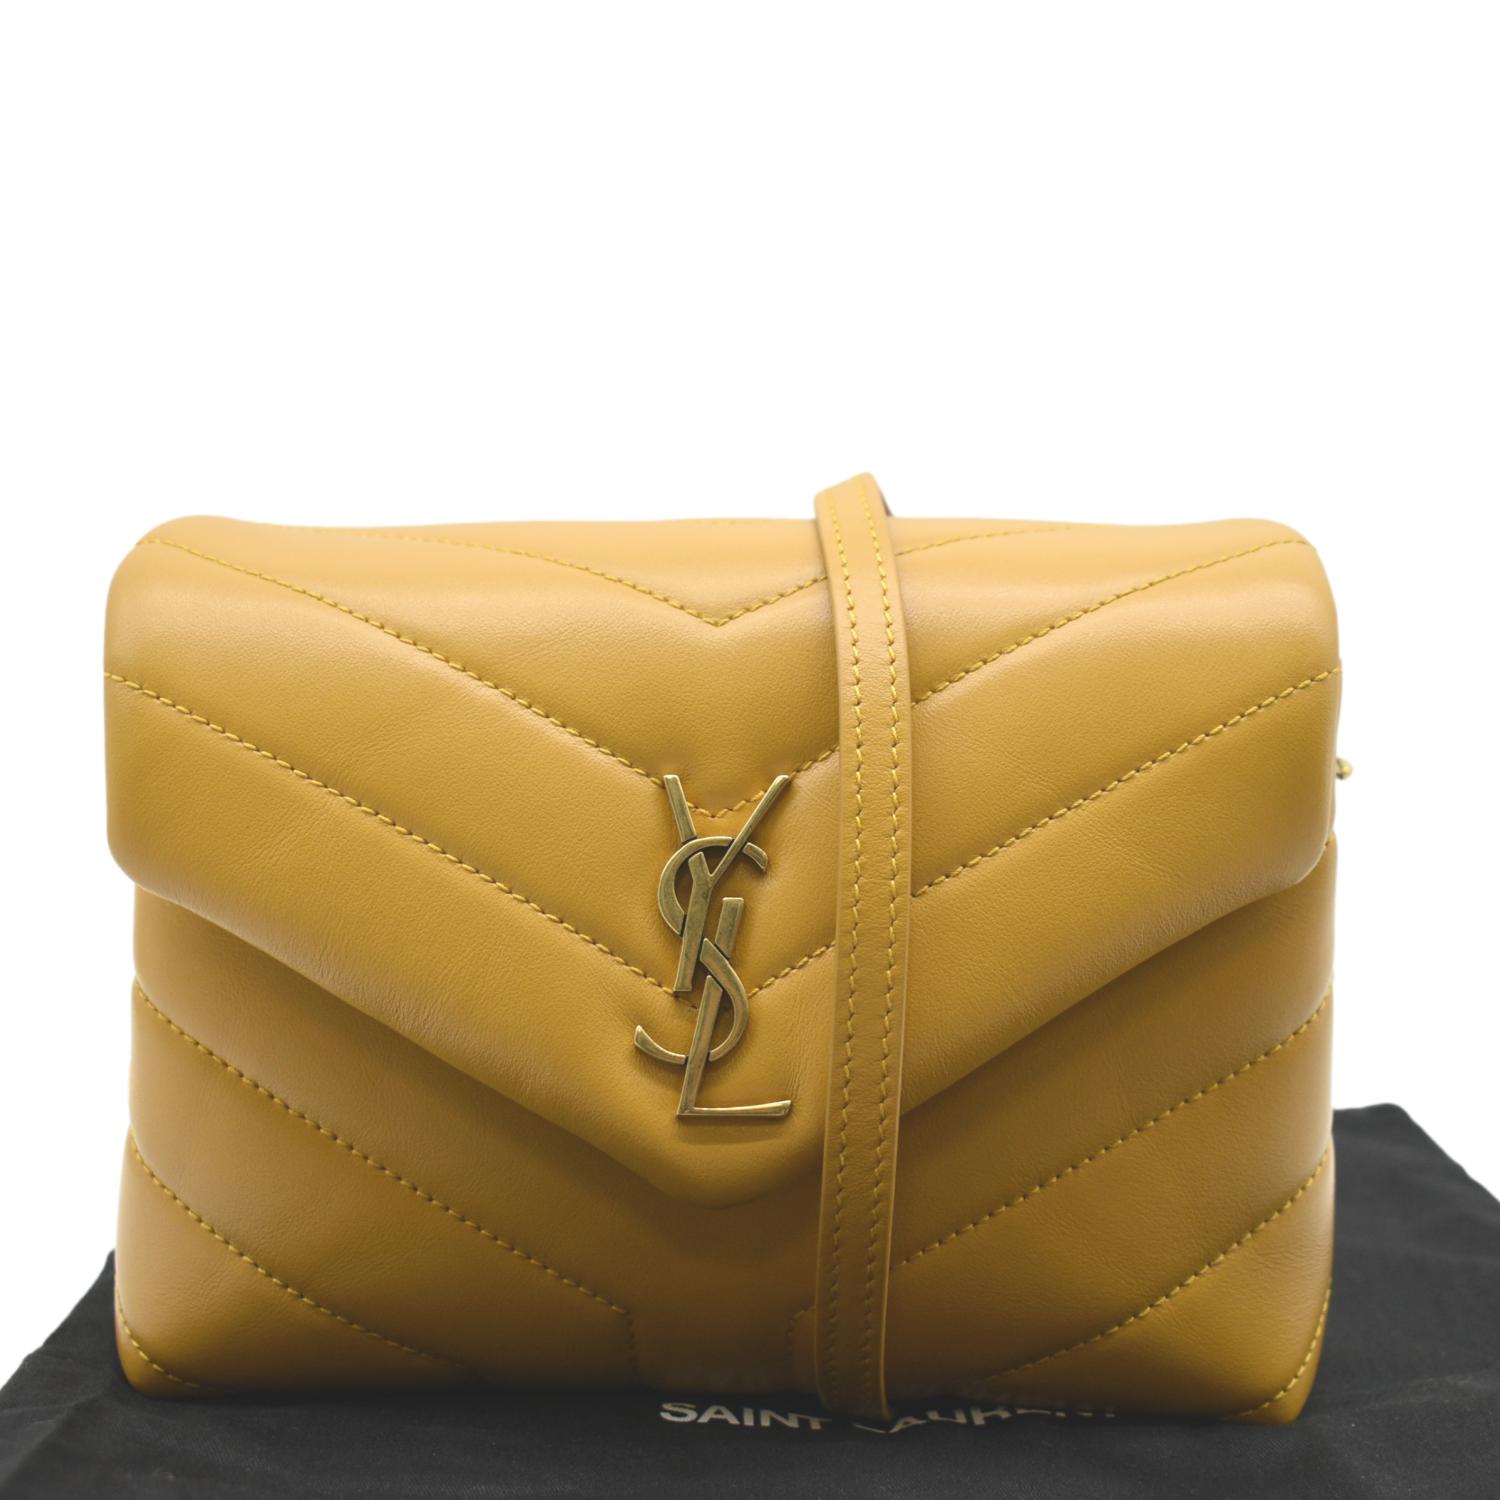 How Do You Authenticate and Care for an Yves Saint Laurent Handbag